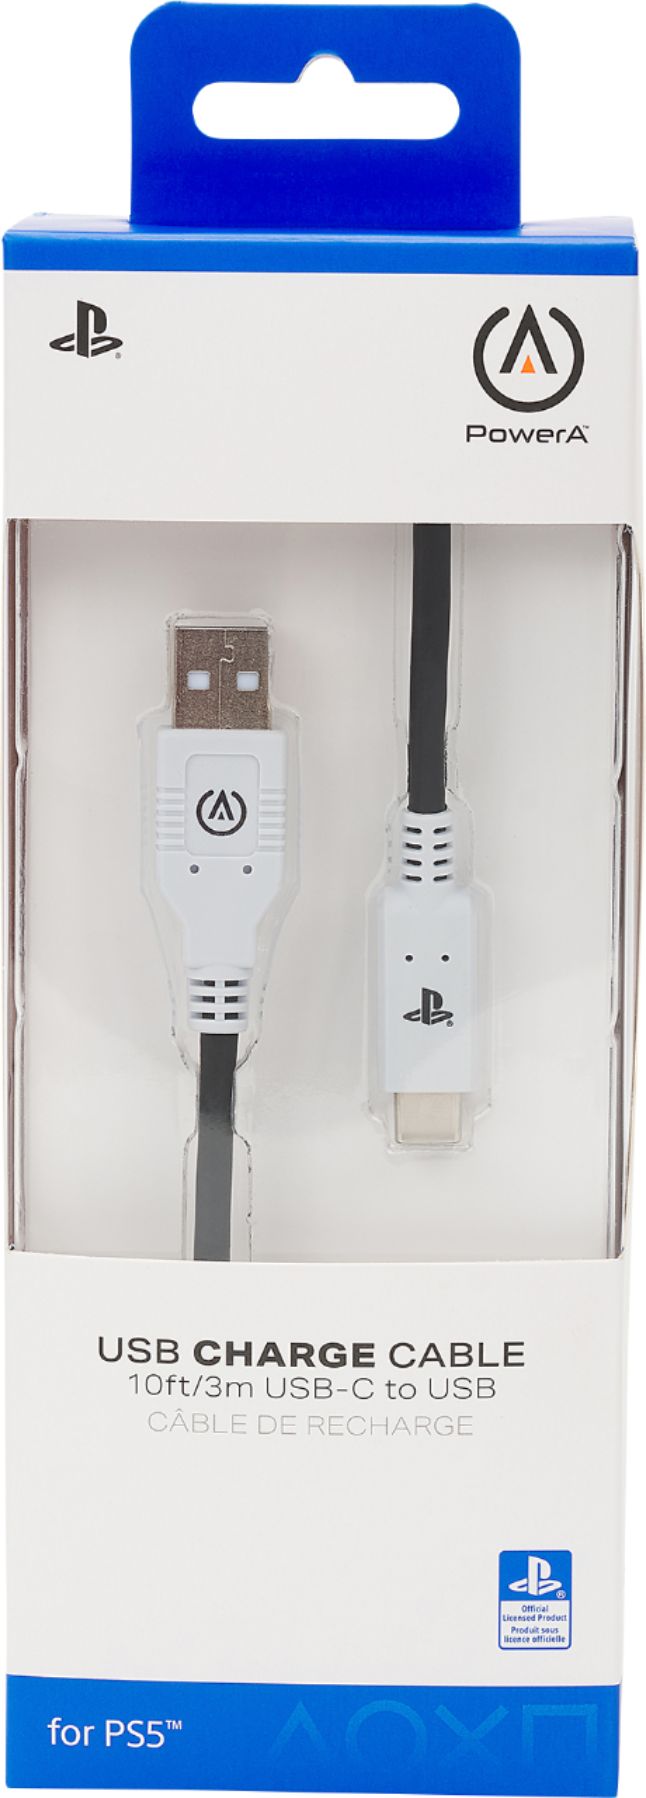 PS5 PowerA USB-C Cable for PlayStation 5 USB-C cable 